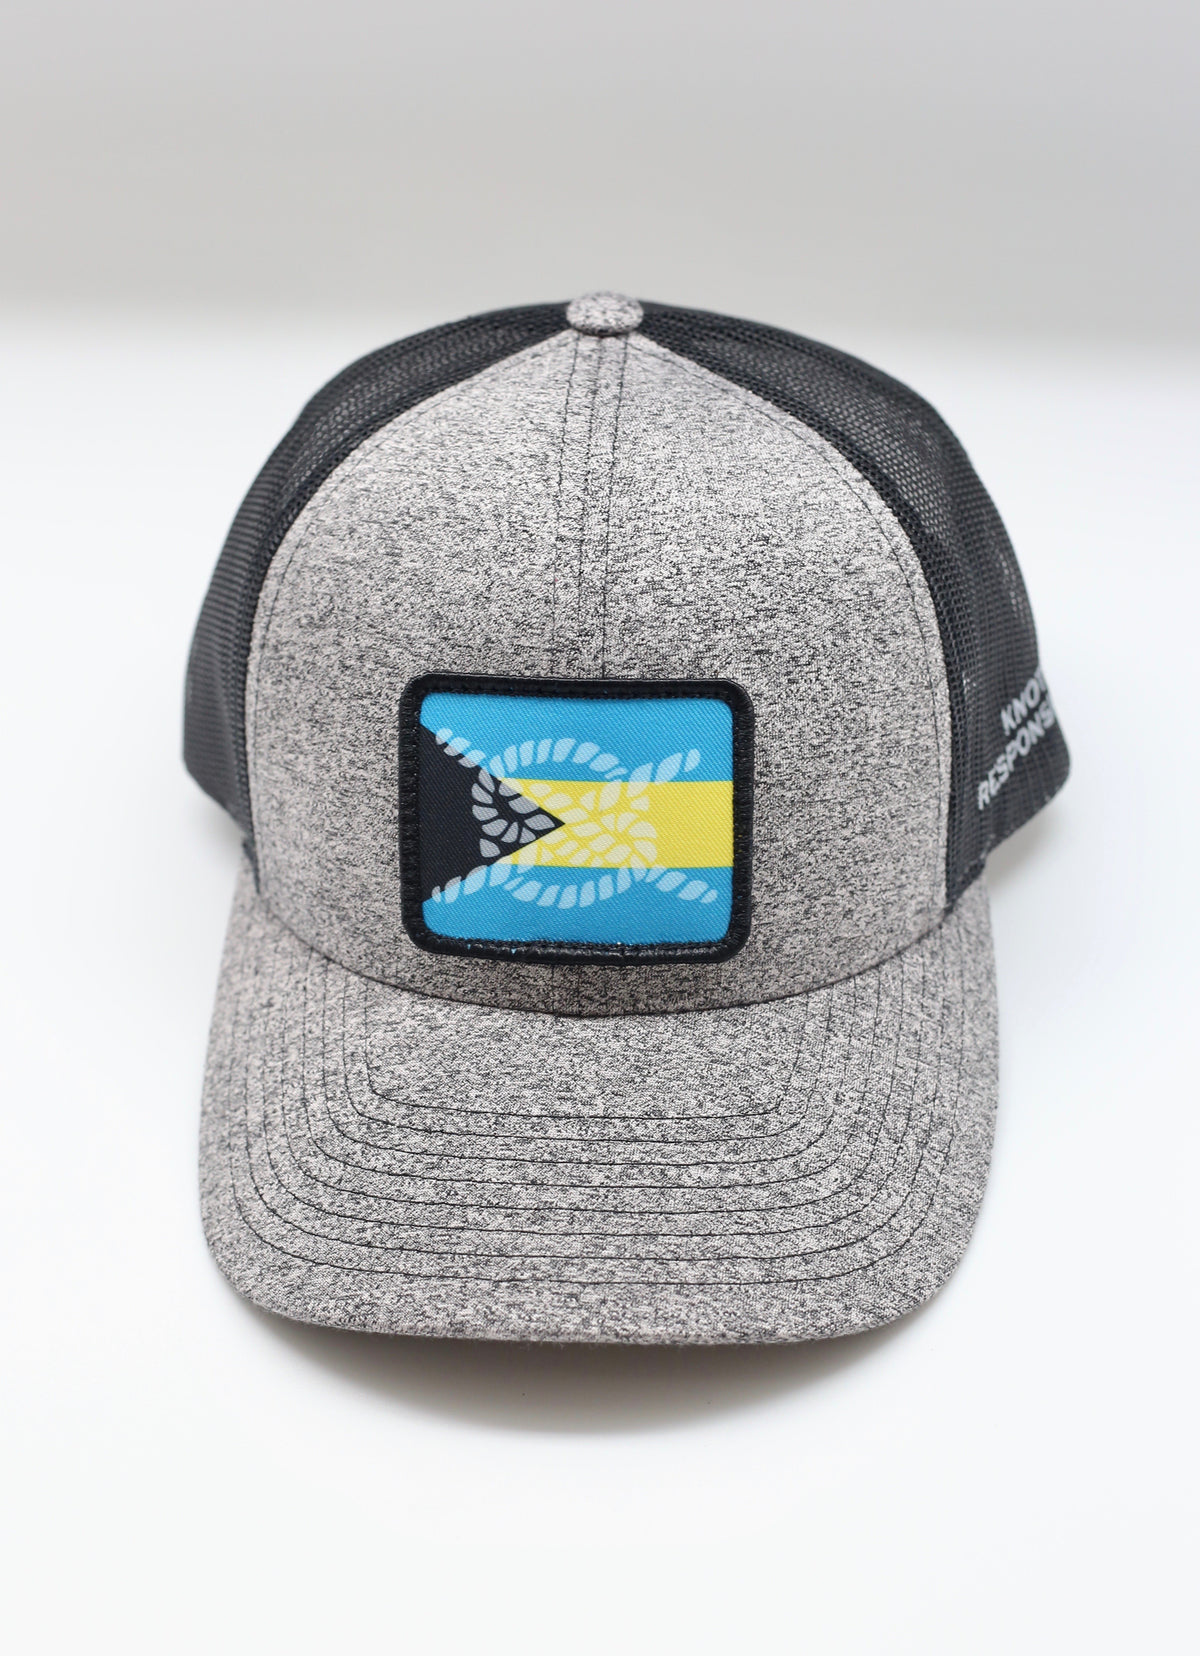 Limited Edition Abaco Strong Low Pro Trucker Hat- Grey & Black